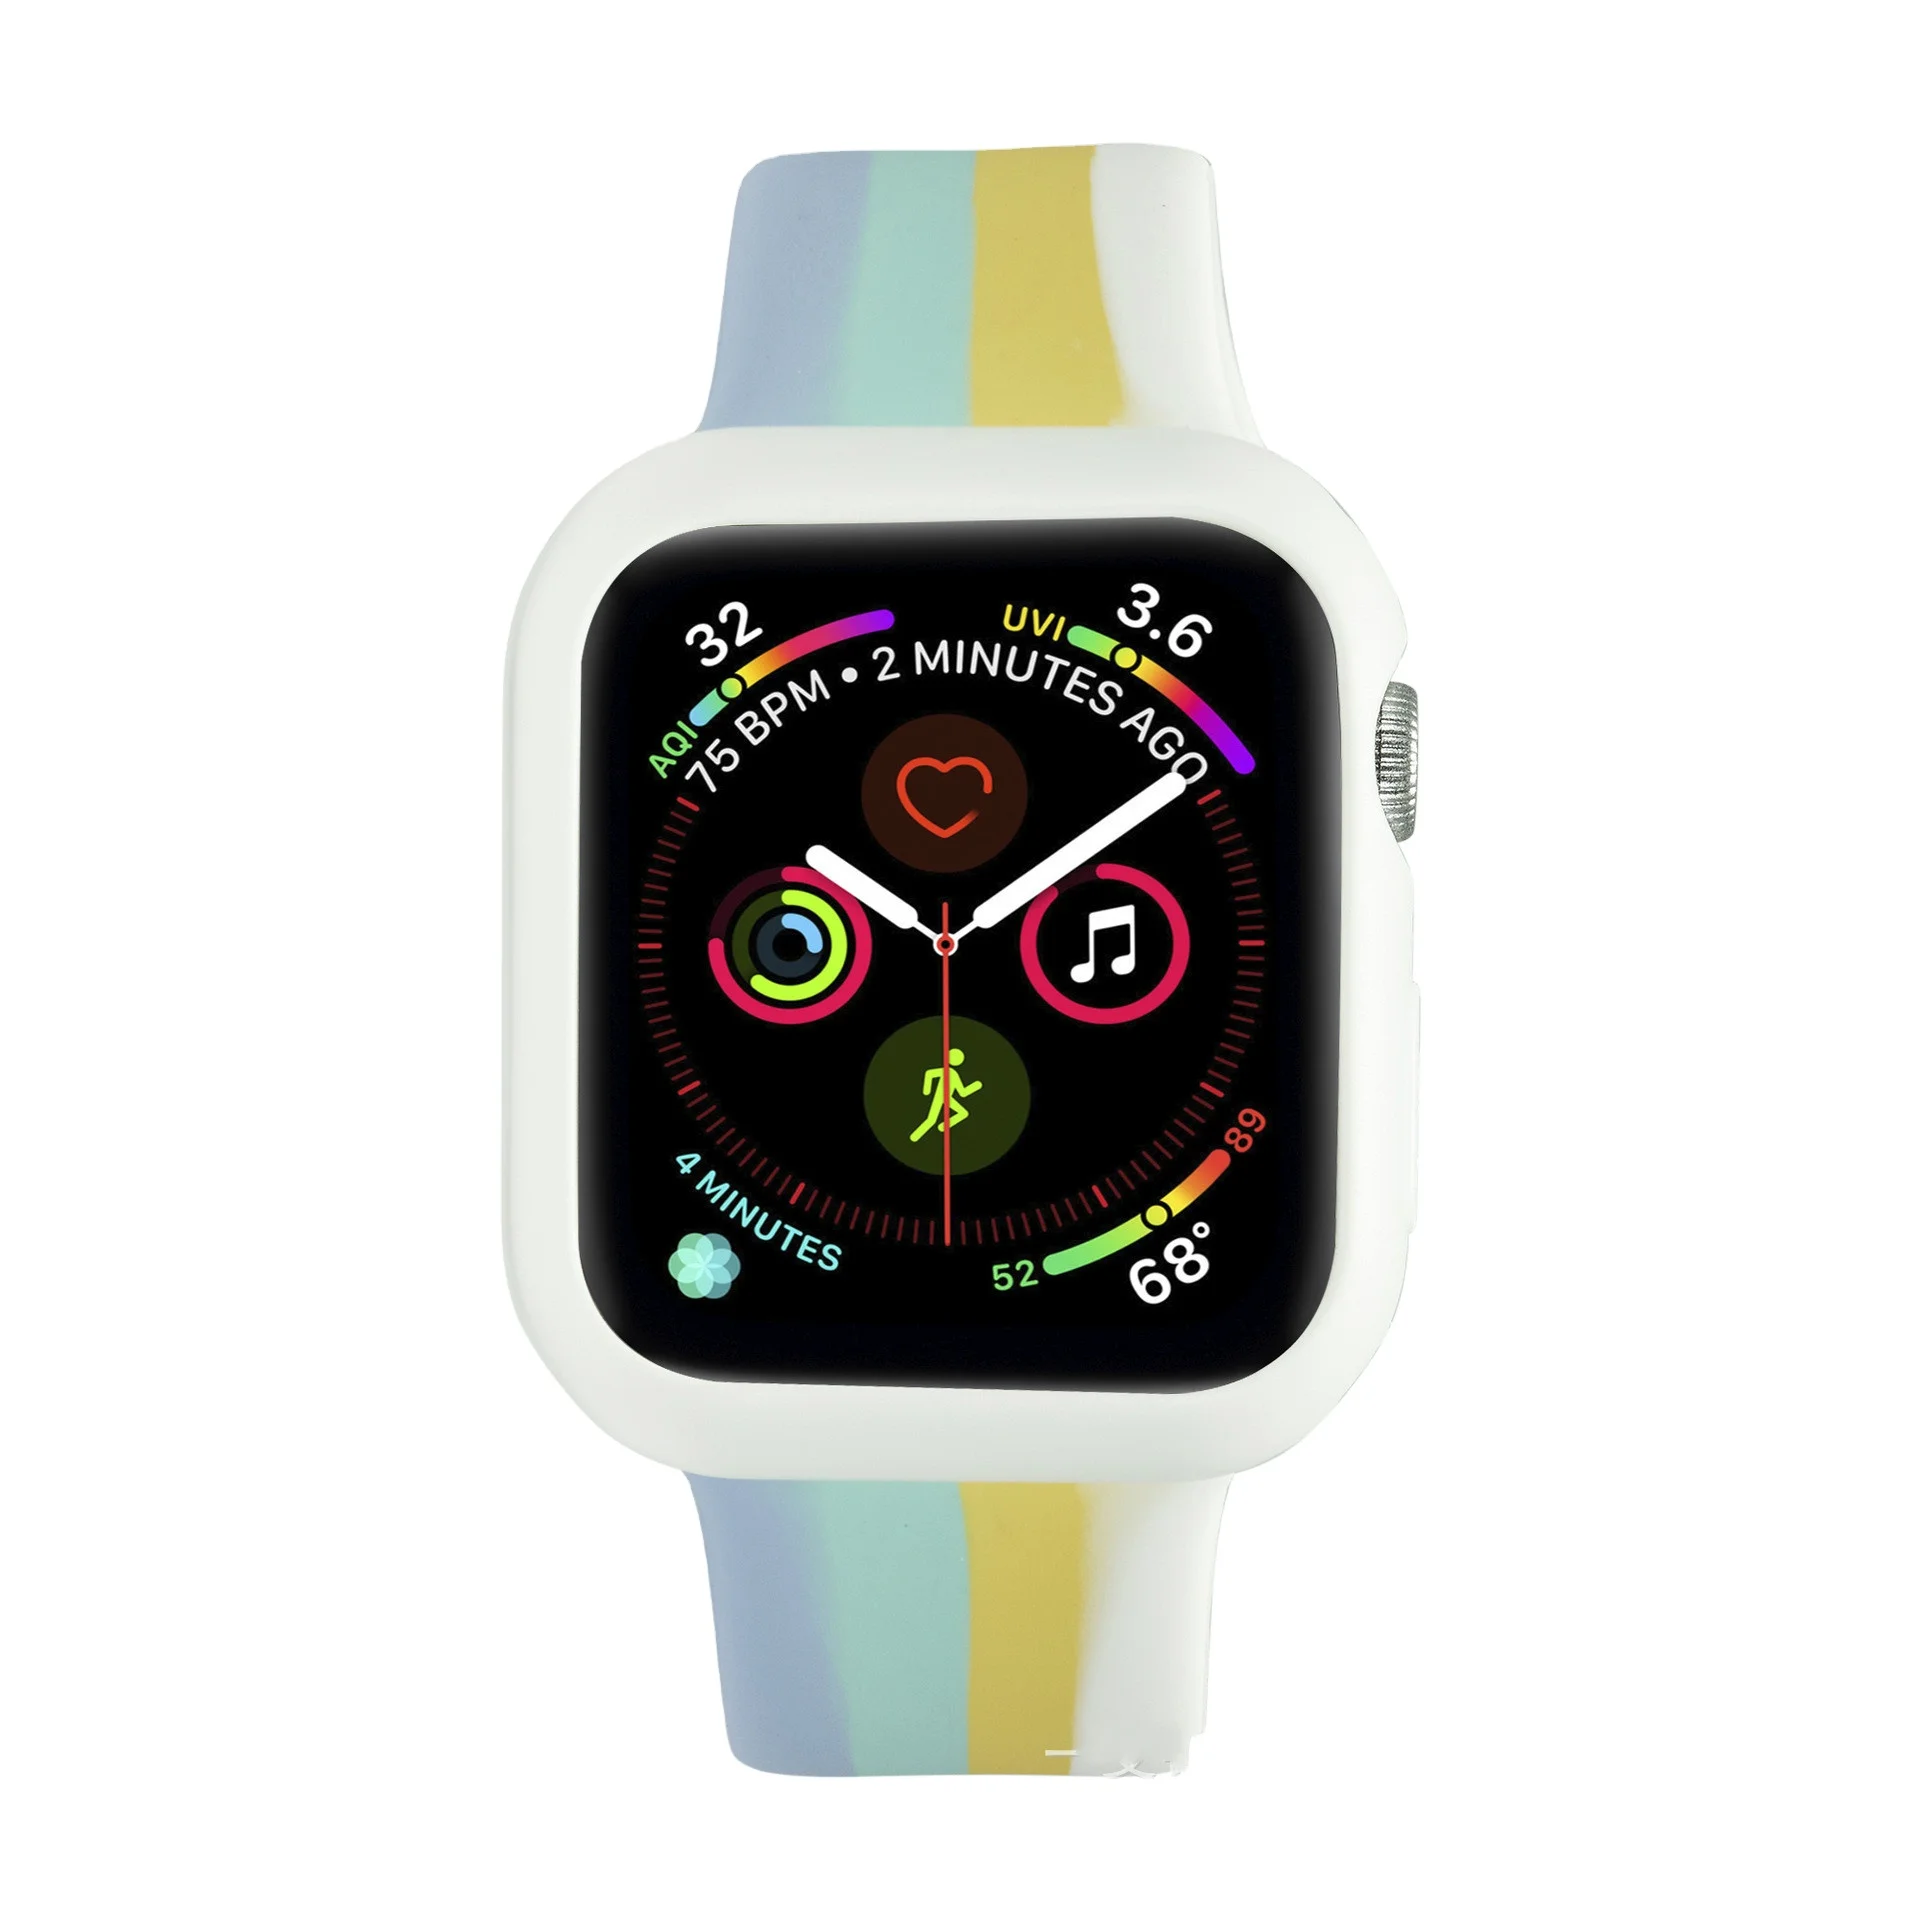 

Newest Rainbow Silicone Watch Band For Apple Watch S6/5/4/3/2/1 Colorful Stretchable Replacement Watch Strap, 10 colors